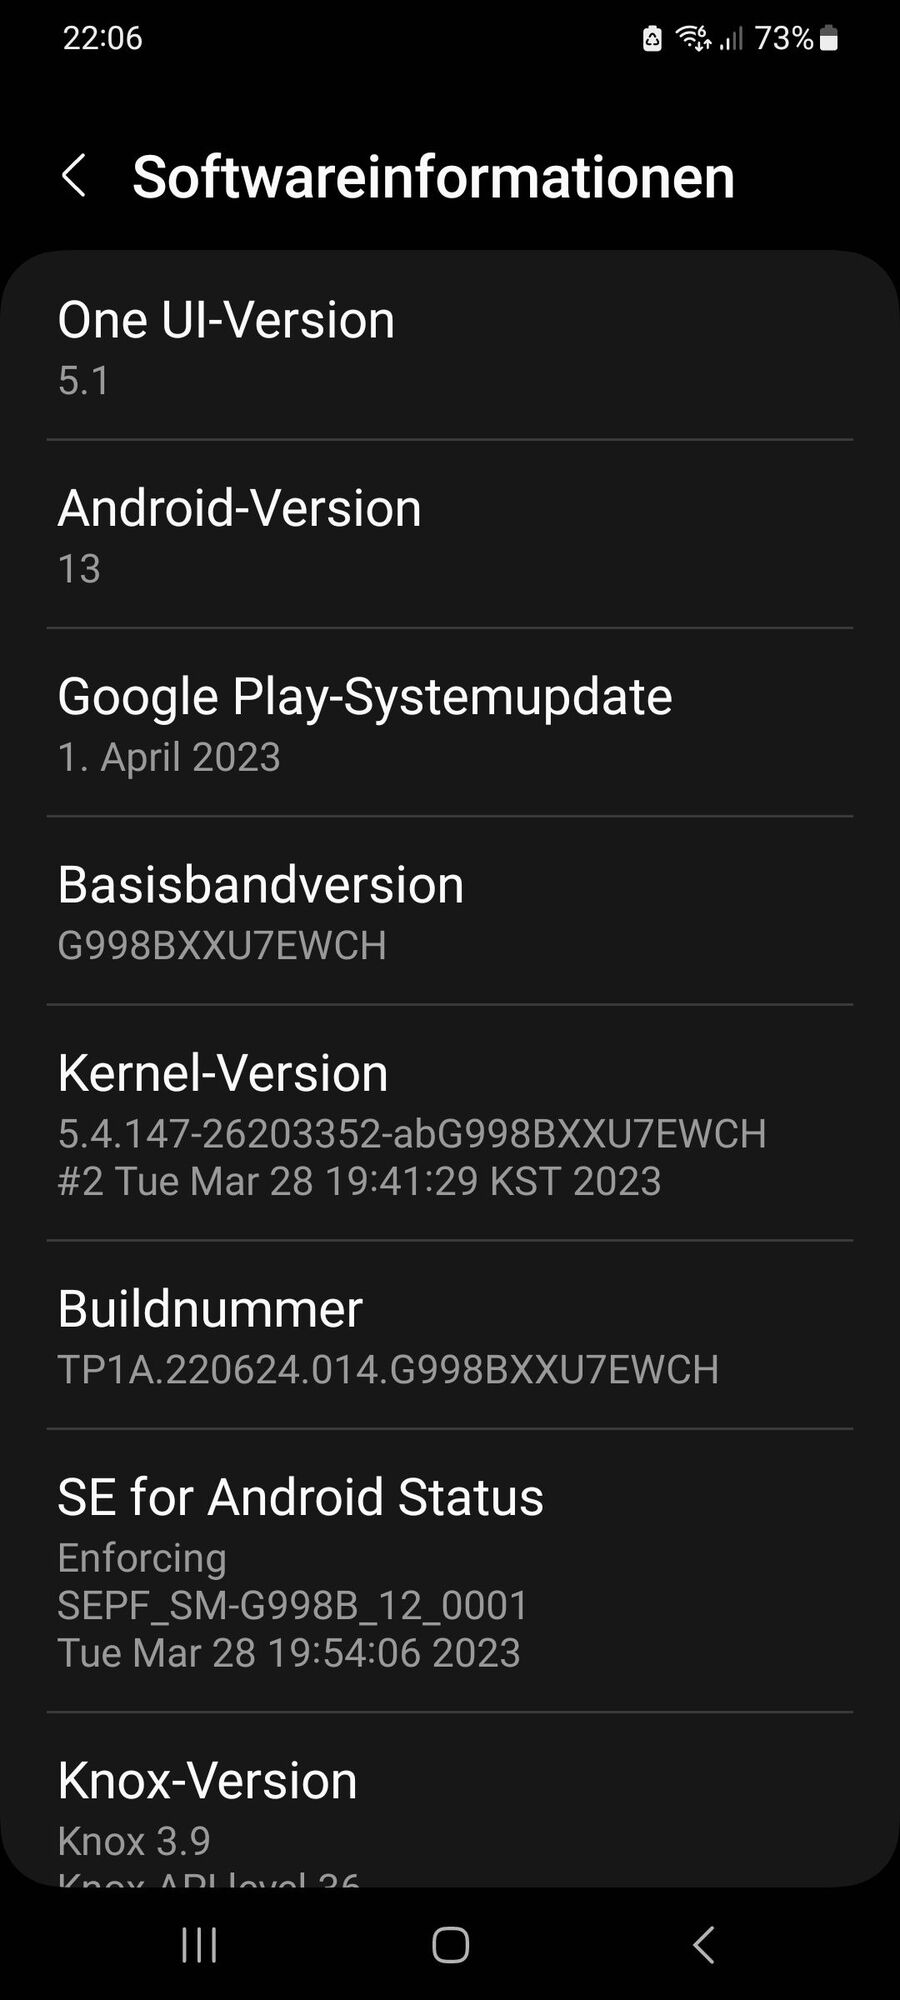 Google Play Systemupdate April 2023